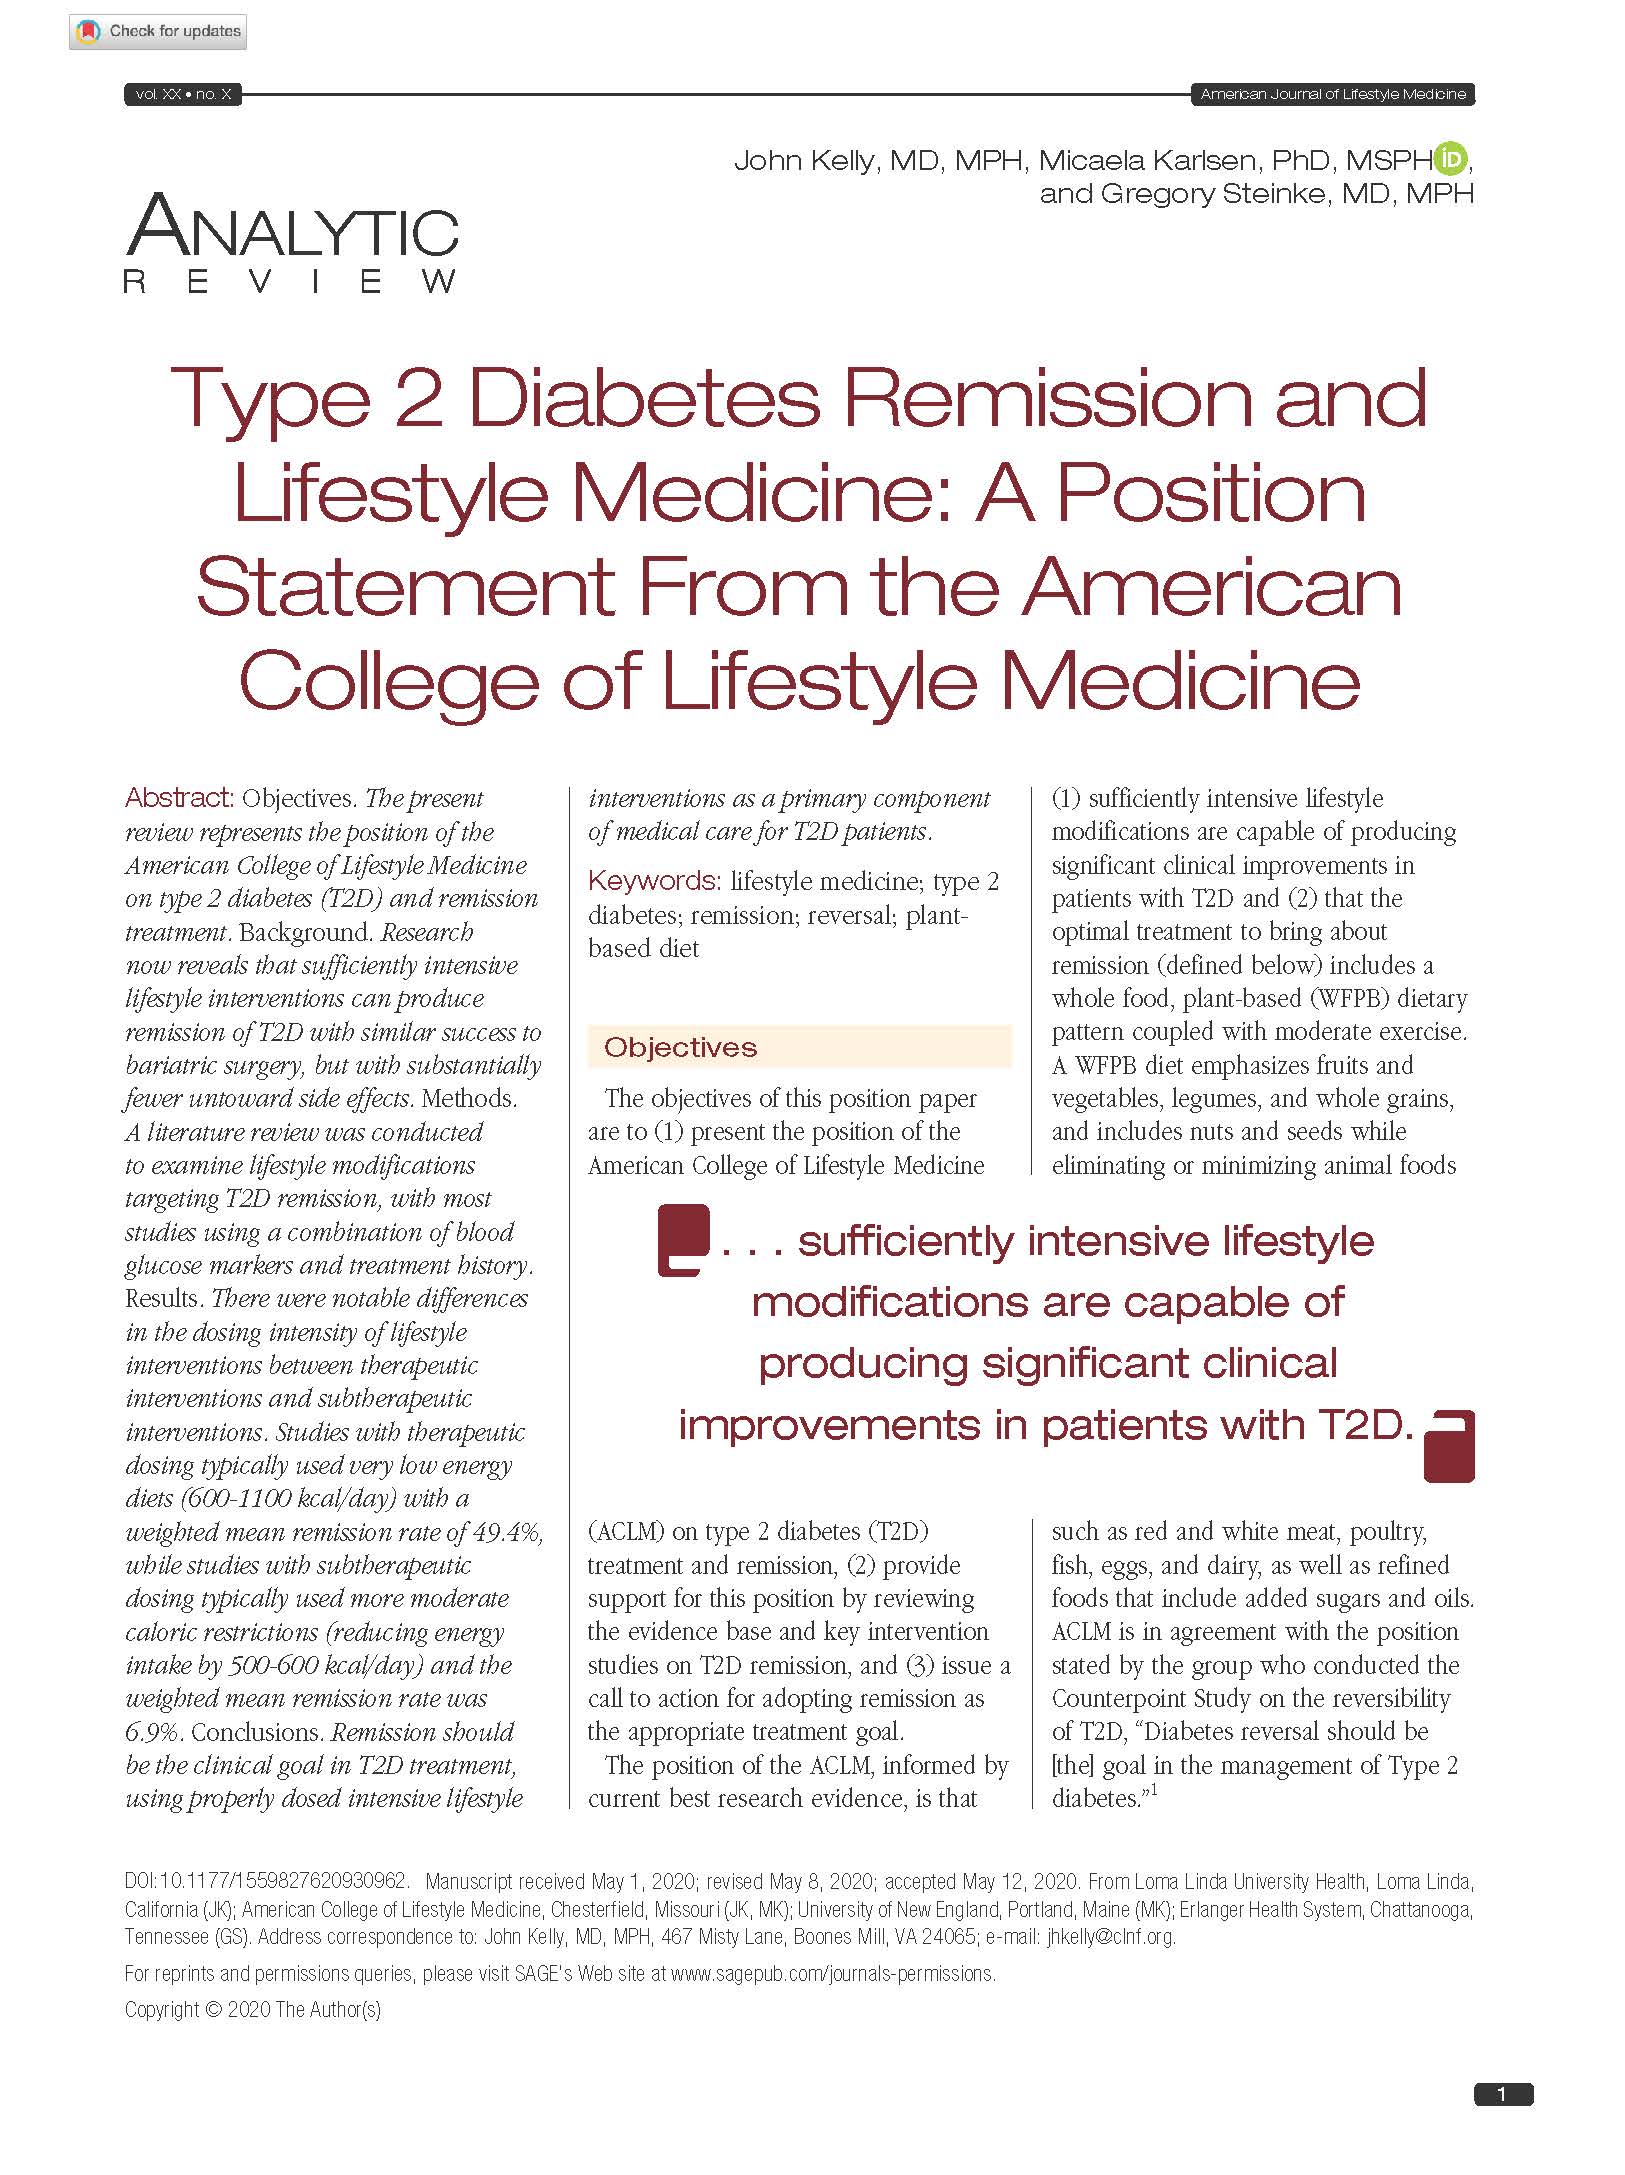 Type 2 Diabetes Remission And Lifestyle Medicine: A Position Statement From The American College Of Lifestyle Medicine